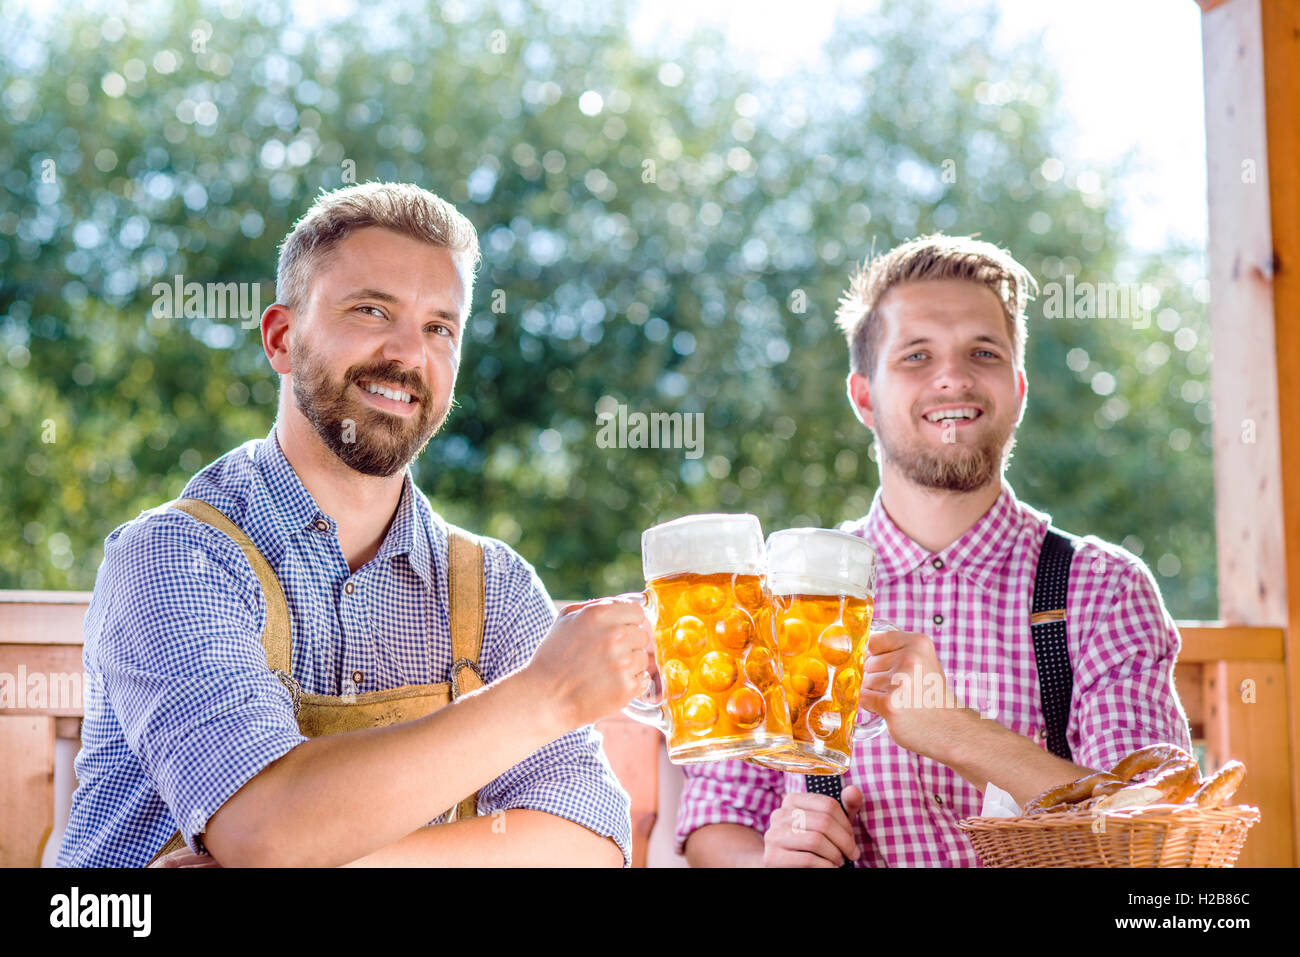 Men in traditional bavarian clothes holding mugs of beer Stock Photo